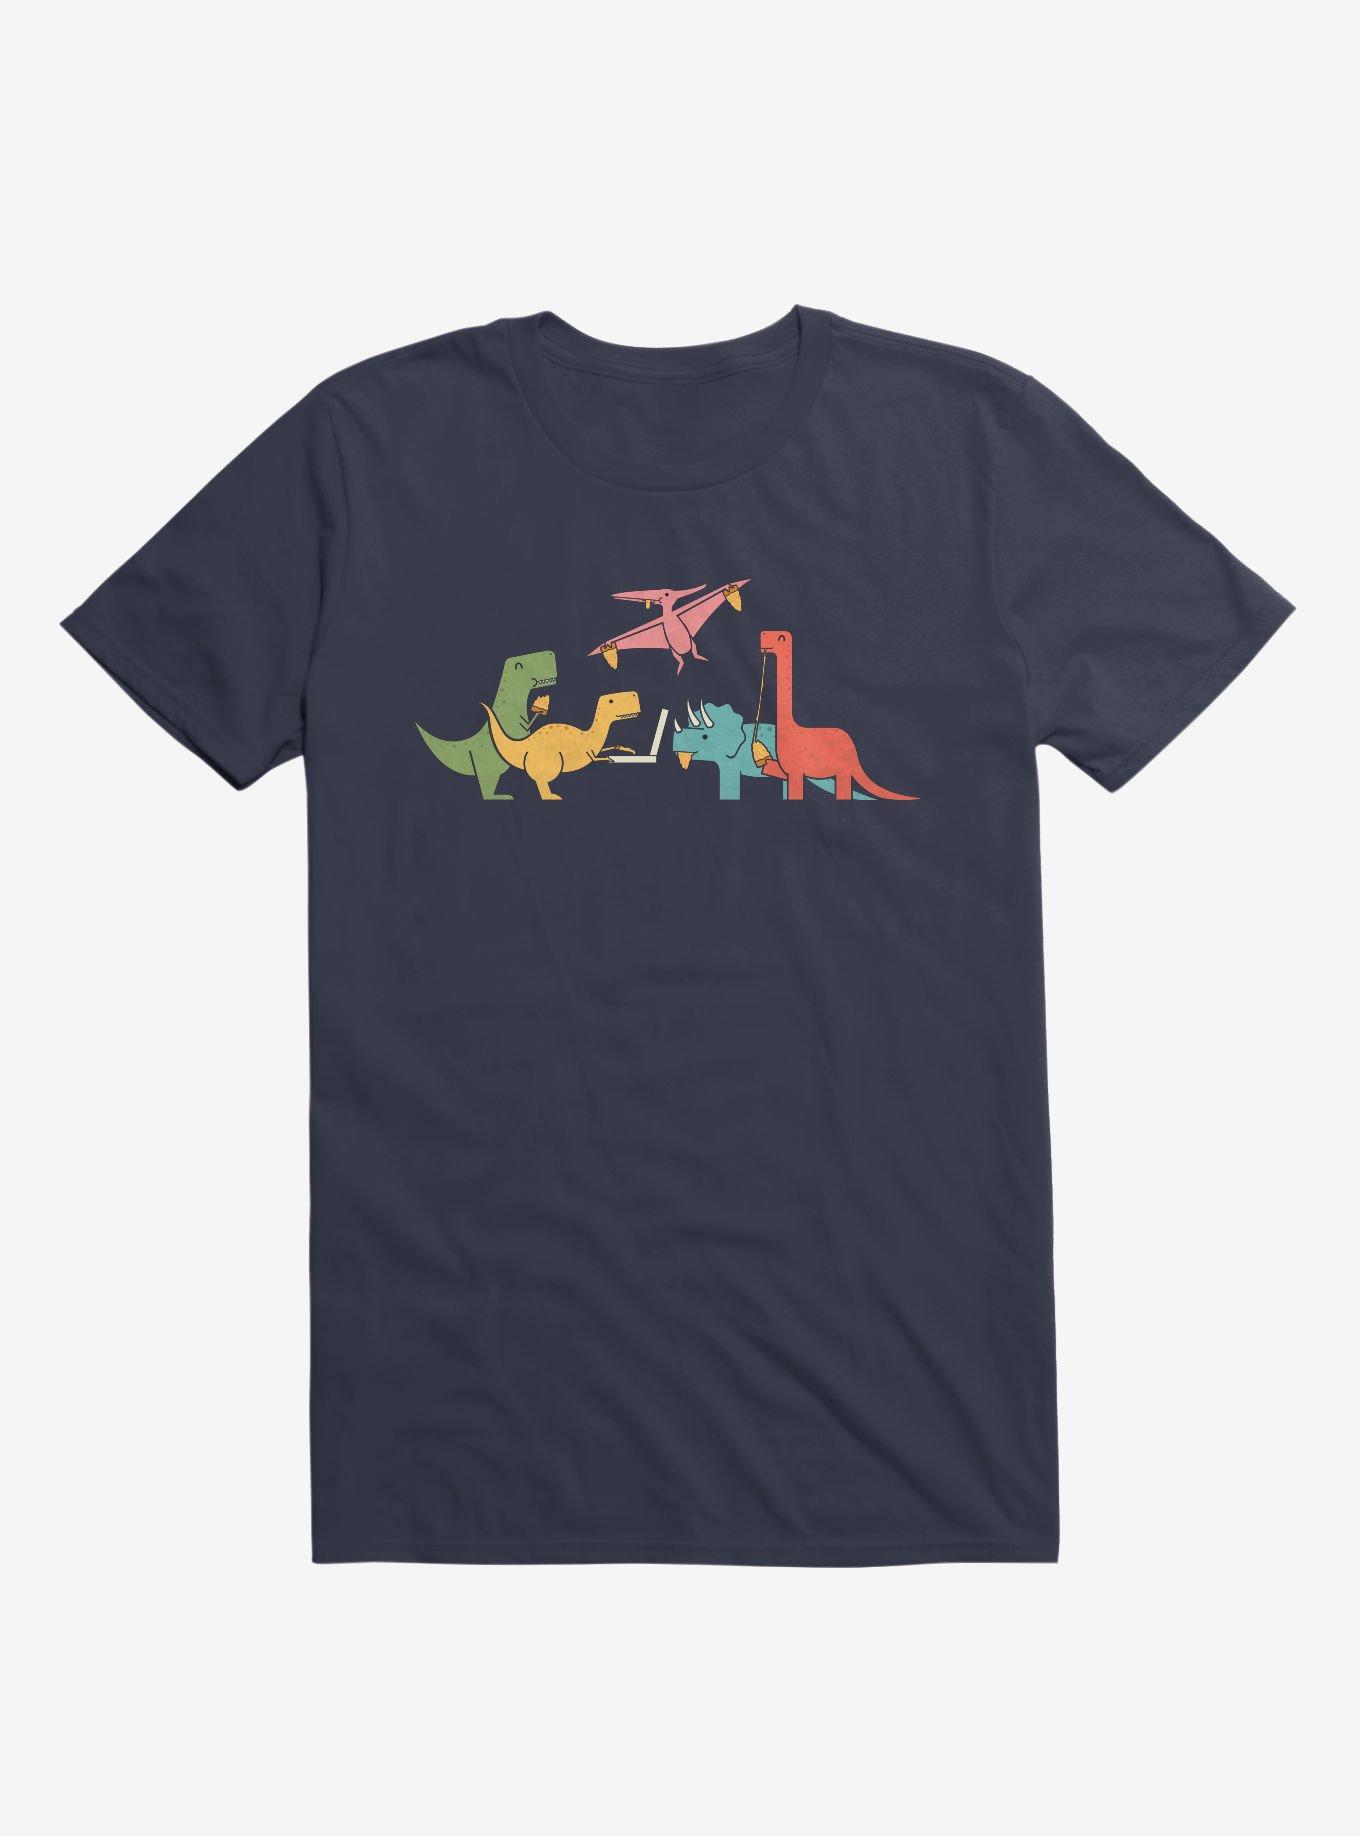 Dinos Eating Pizza Navy Blue T-Shirt